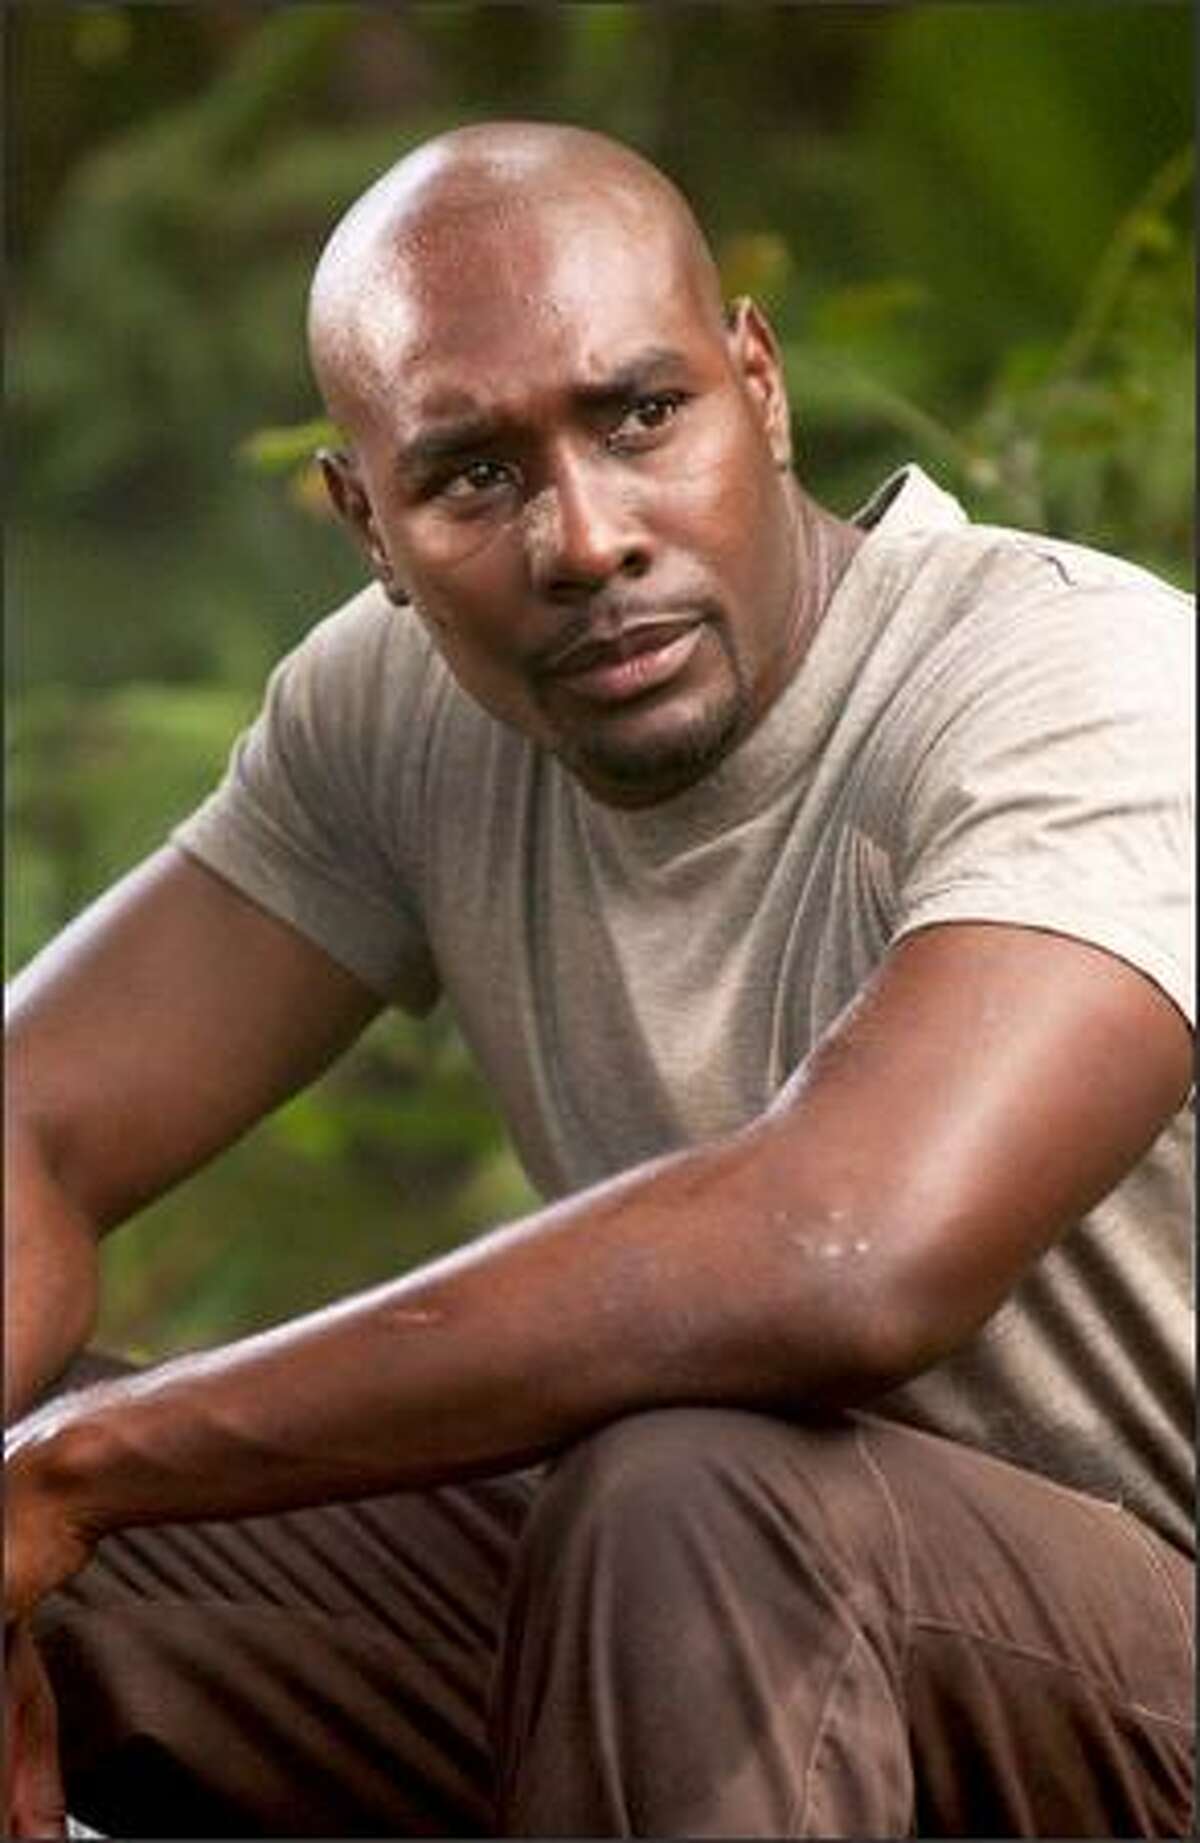 Morris Chestnut plays Gordon Mitchell, the research team?•s financial guy, who keeps a constant eye on the potential wealth in their quest to find a "fountain of youth" in Borneo.